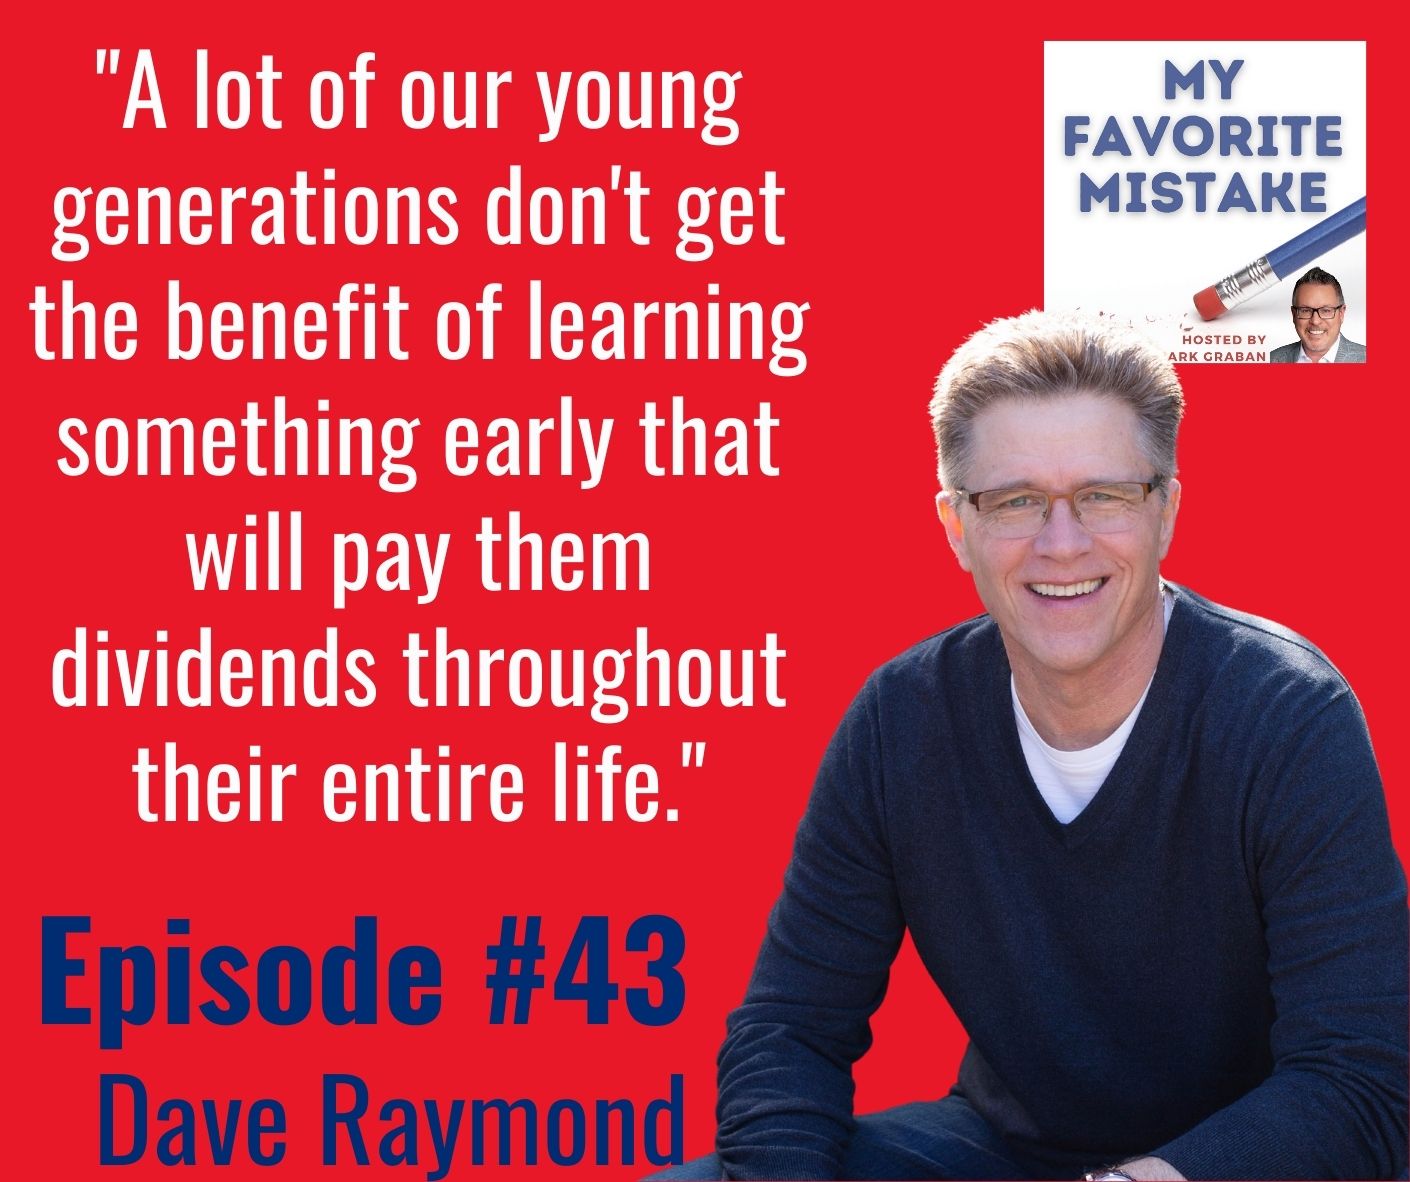 "A lot of our young generations don't get the benefit of learning something early that will pay them dividends throughout their entire life."